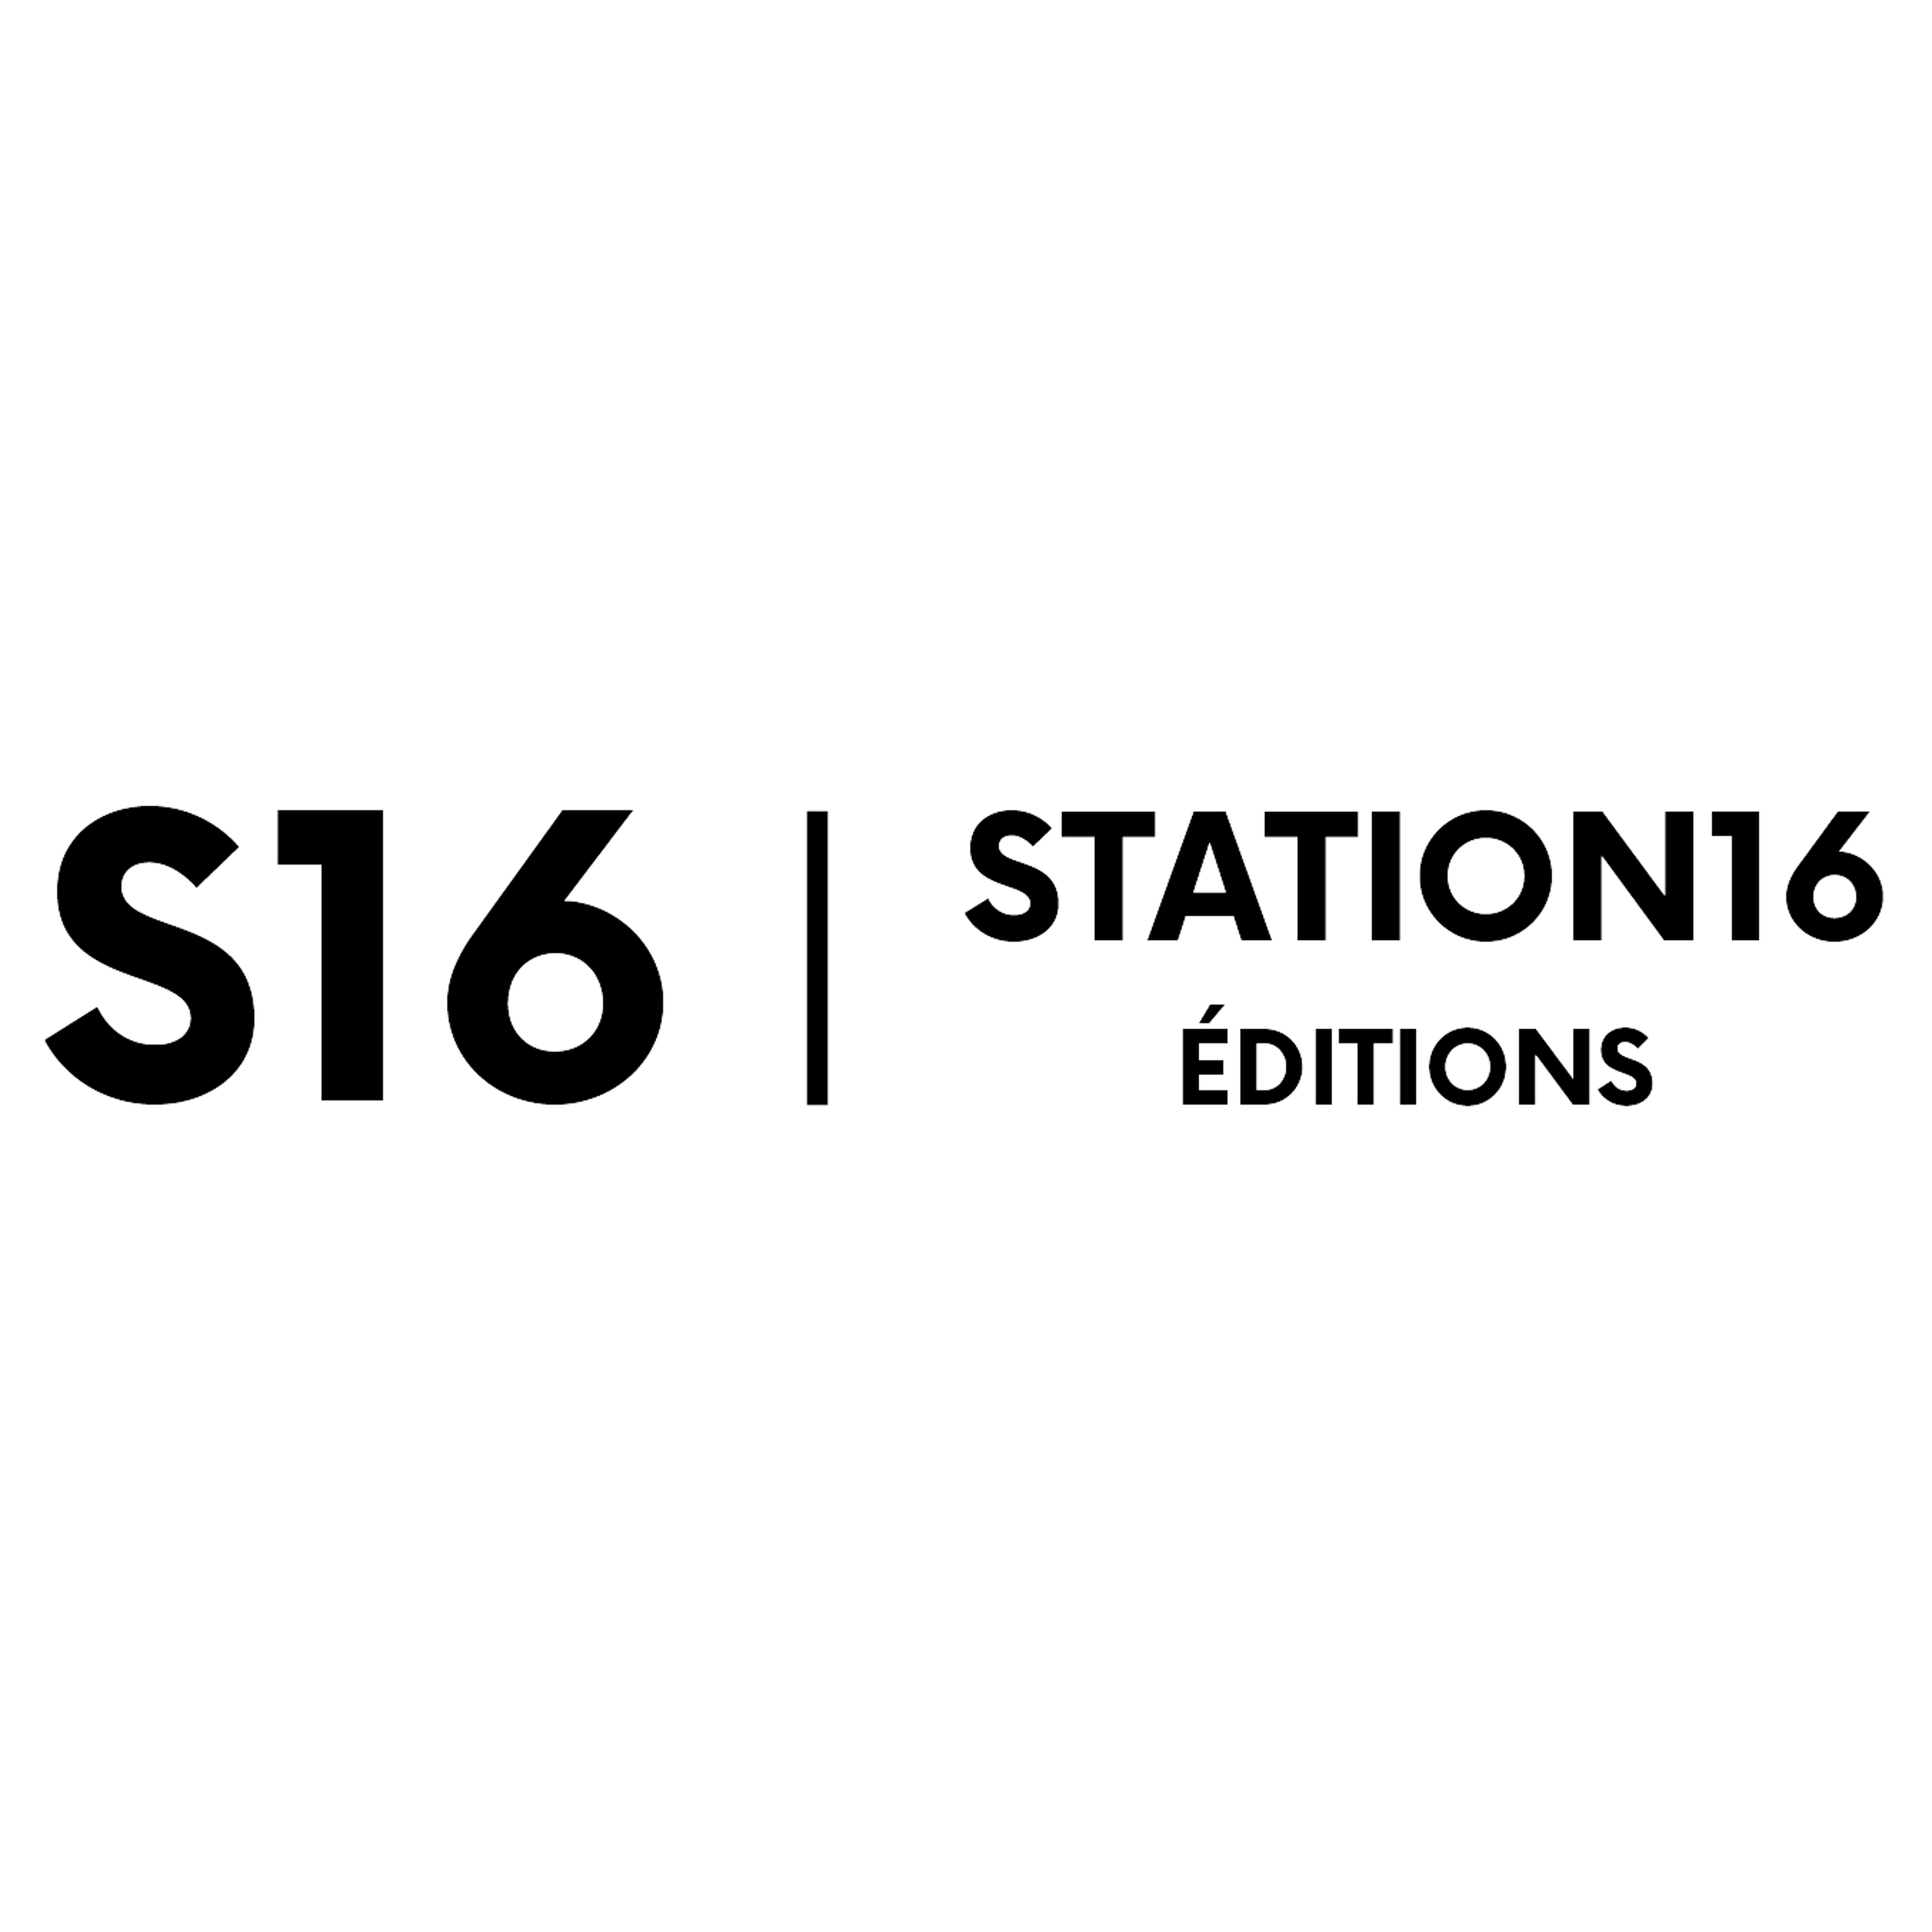 Station 16 Editions